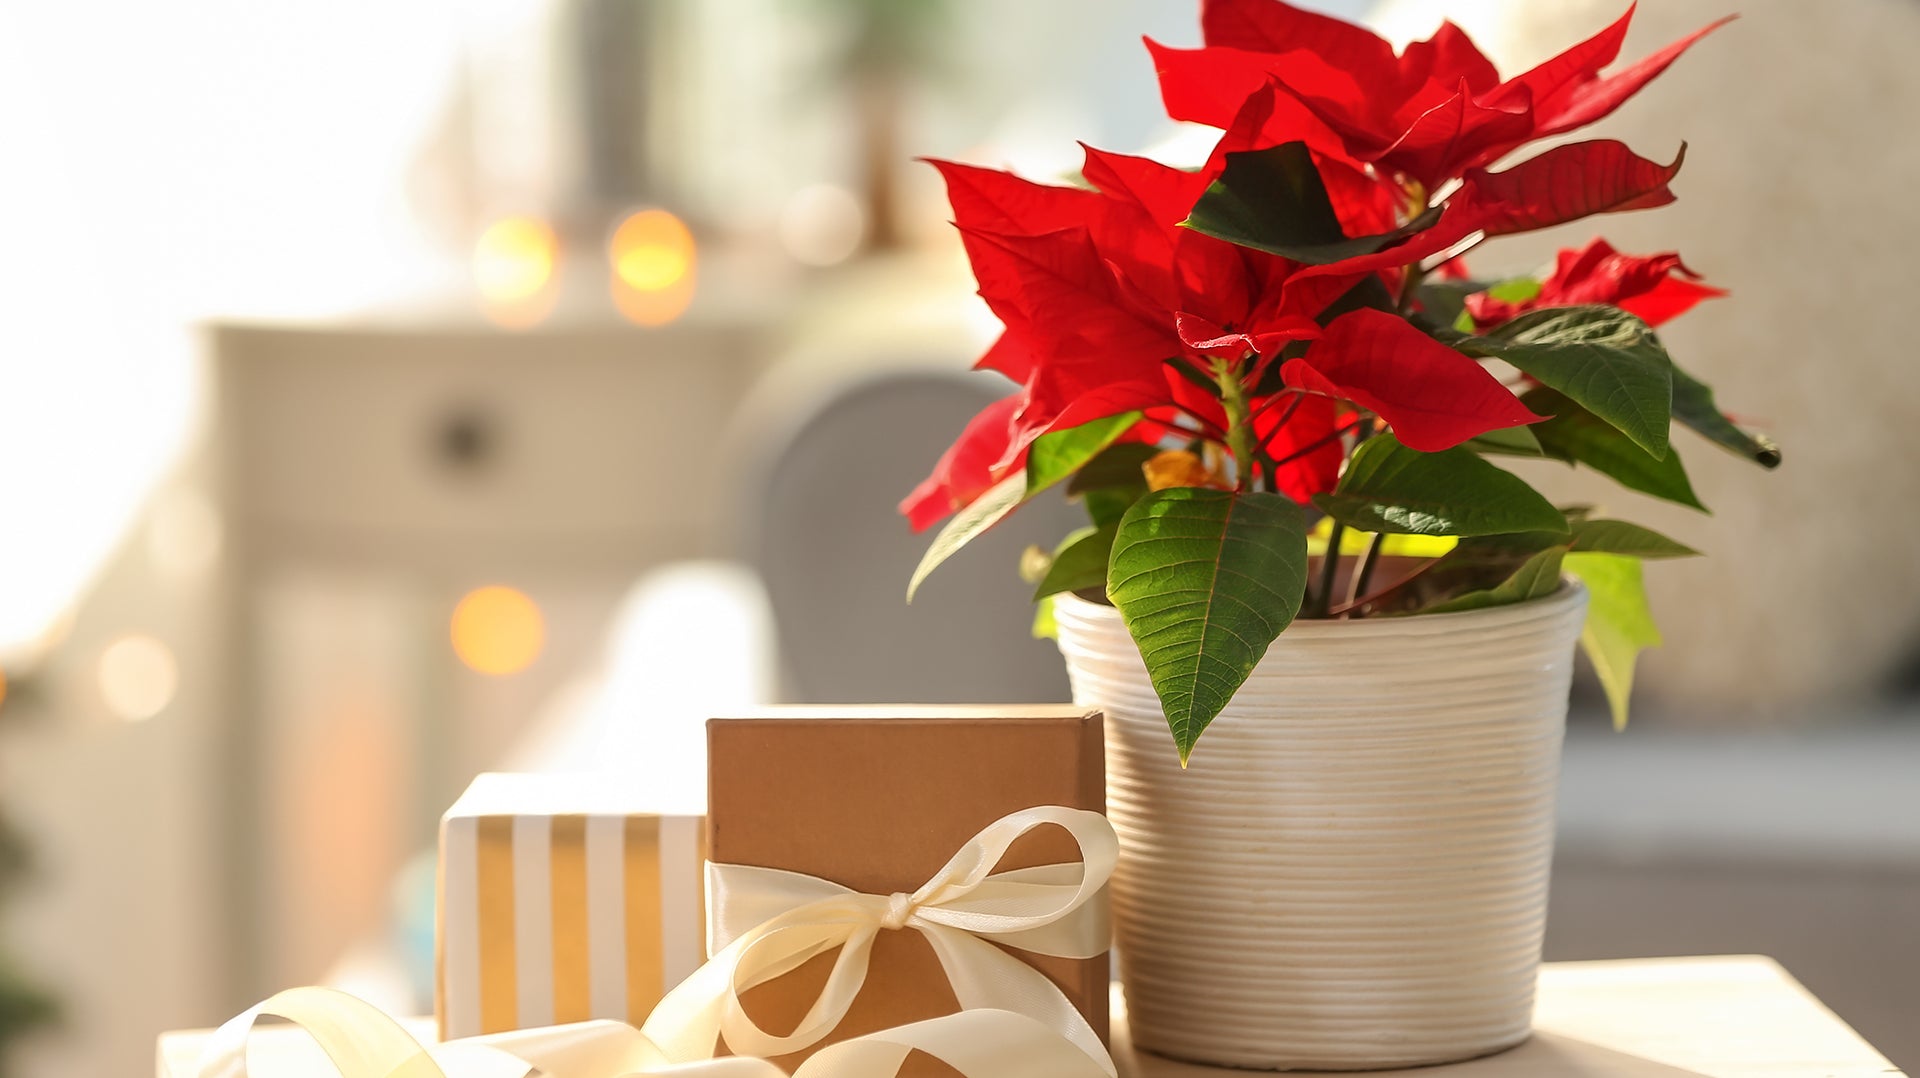 How to Care for Your Poinsettia at Home